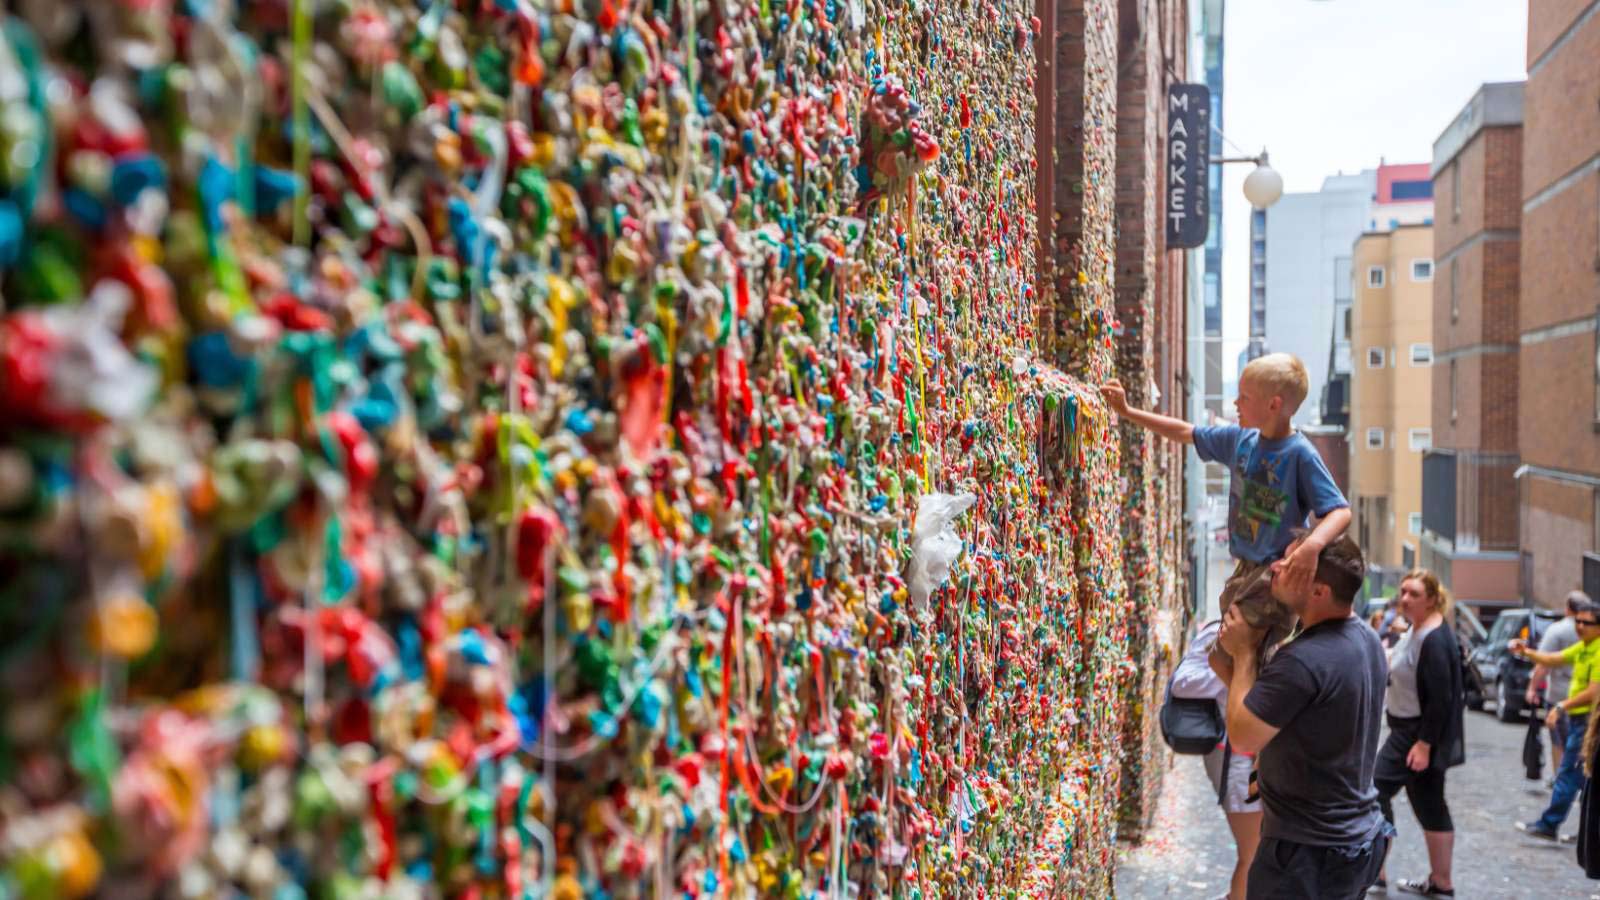 <p>Since the early 1990s, people have been sticking gum on this 50-foot long wall, located outside the main entrance of Pike Place Market. In 2015, over 2,350 pounds of gum were removed, taking over 100 hours to clean. Despite the efforts, the wall is still covered in gum and continues to attract visitors.</p>